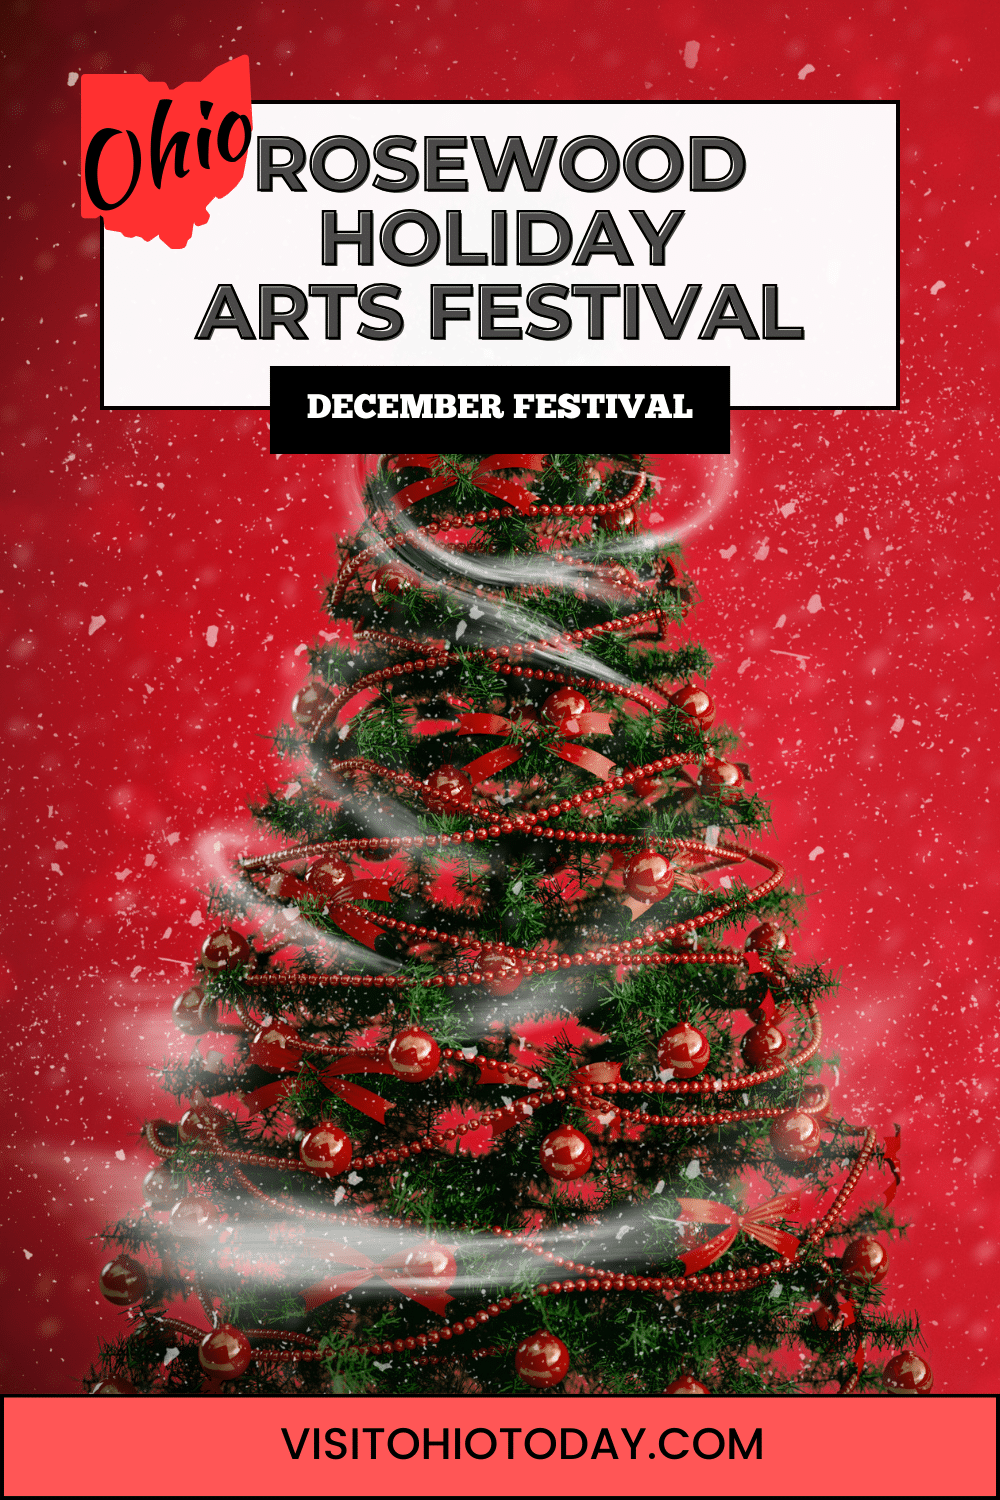 The Rosewood Holiday Arts Festival is in Kettering on the first Saturday of December, at the Rosewood Arts Center. Admission to this event is free.